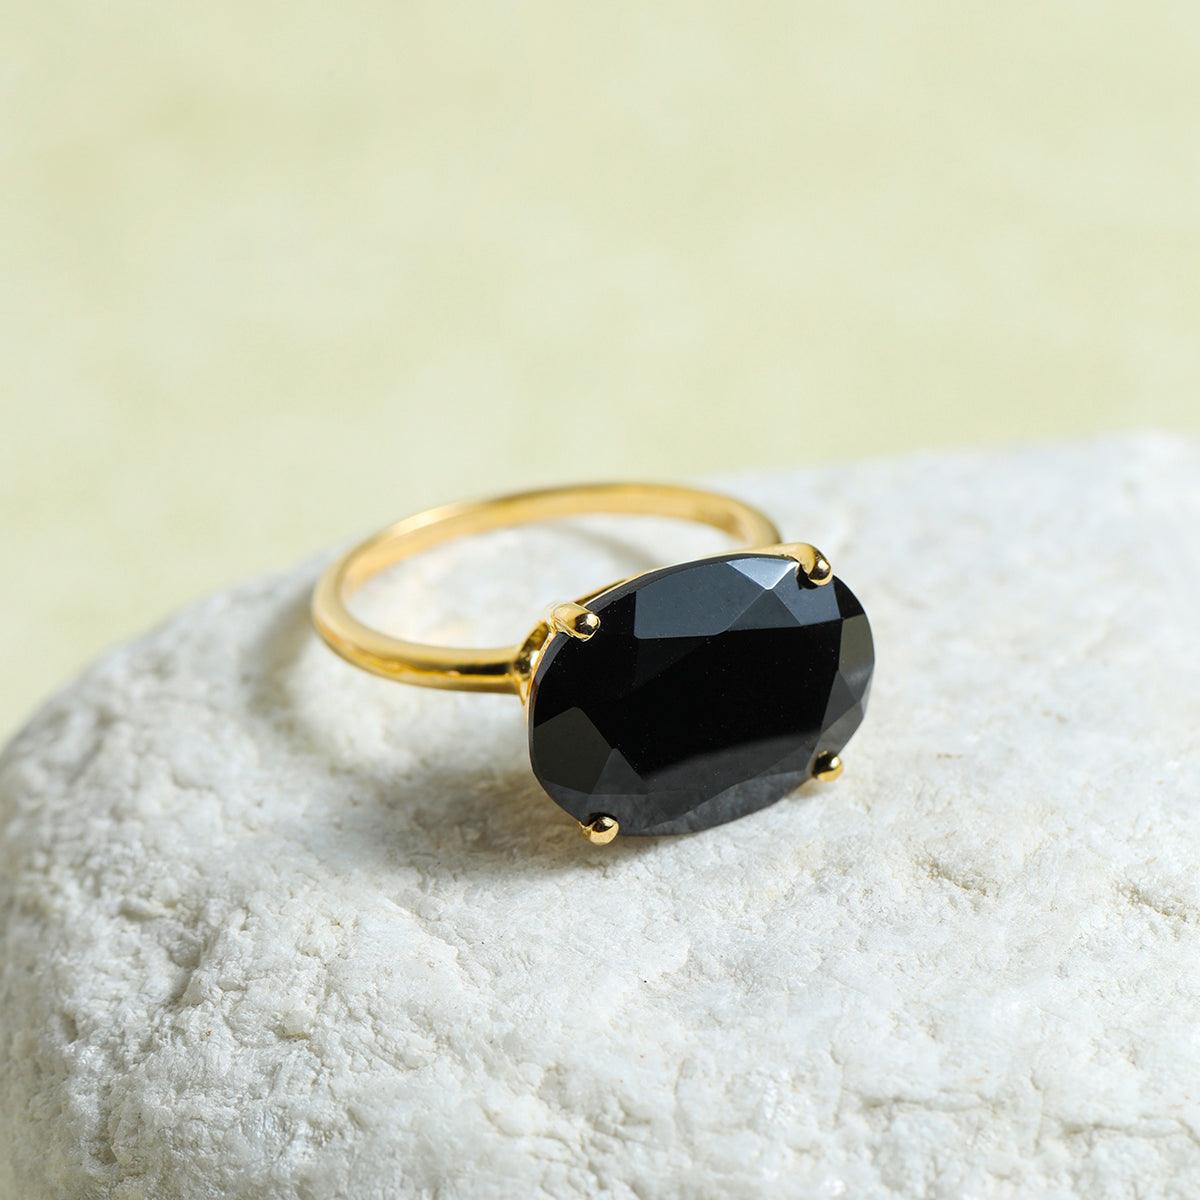 Black Onyx Solitaire Ring 14k Gold Over 925 Silver - YoTreasure